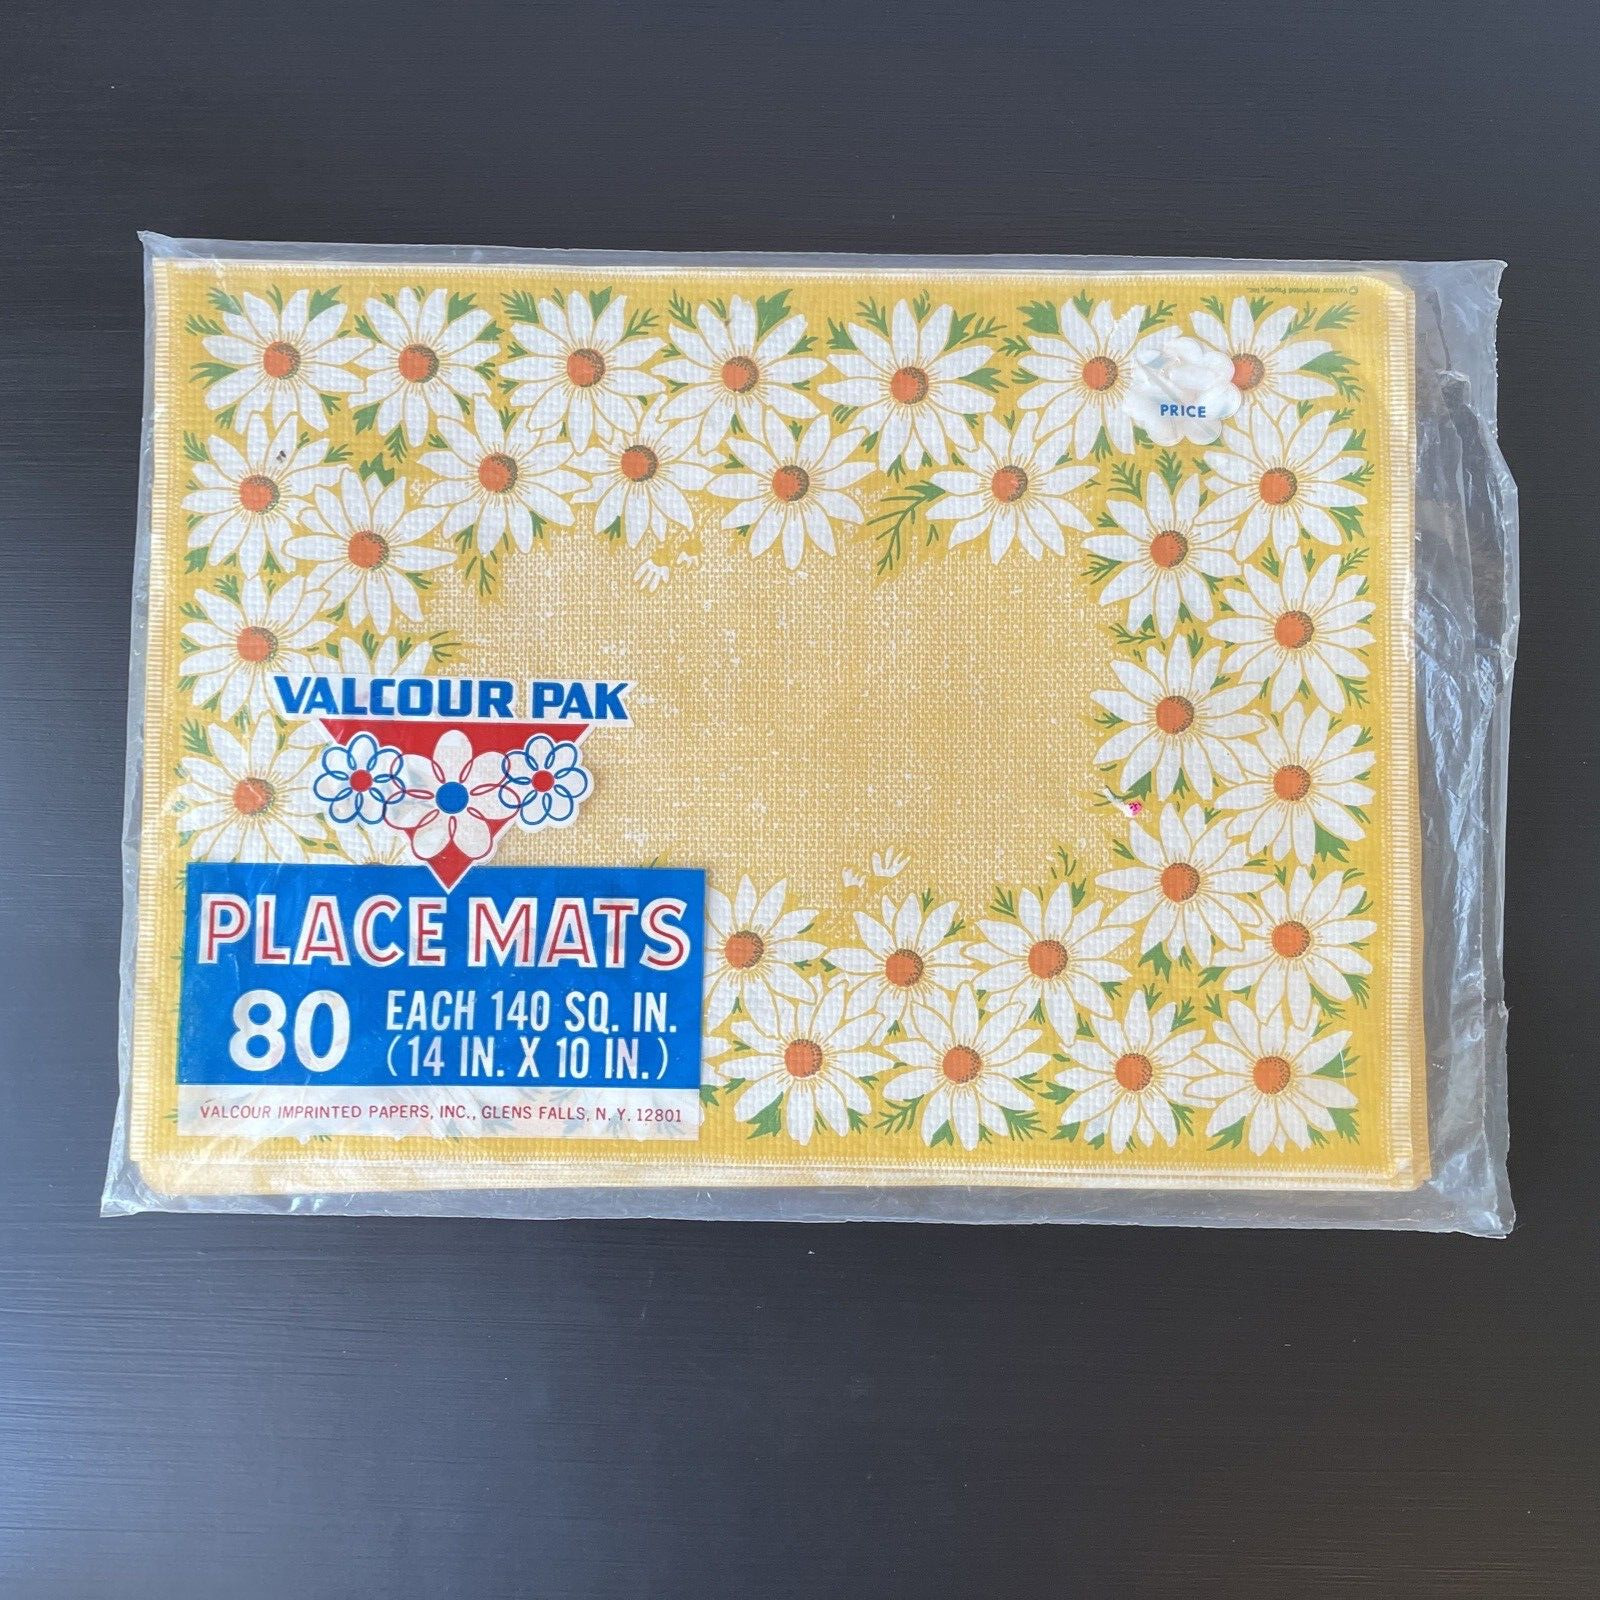 Vintage Daisies Pattern Paper Place Mats Valcour Pak Yellow White Daisy Floral